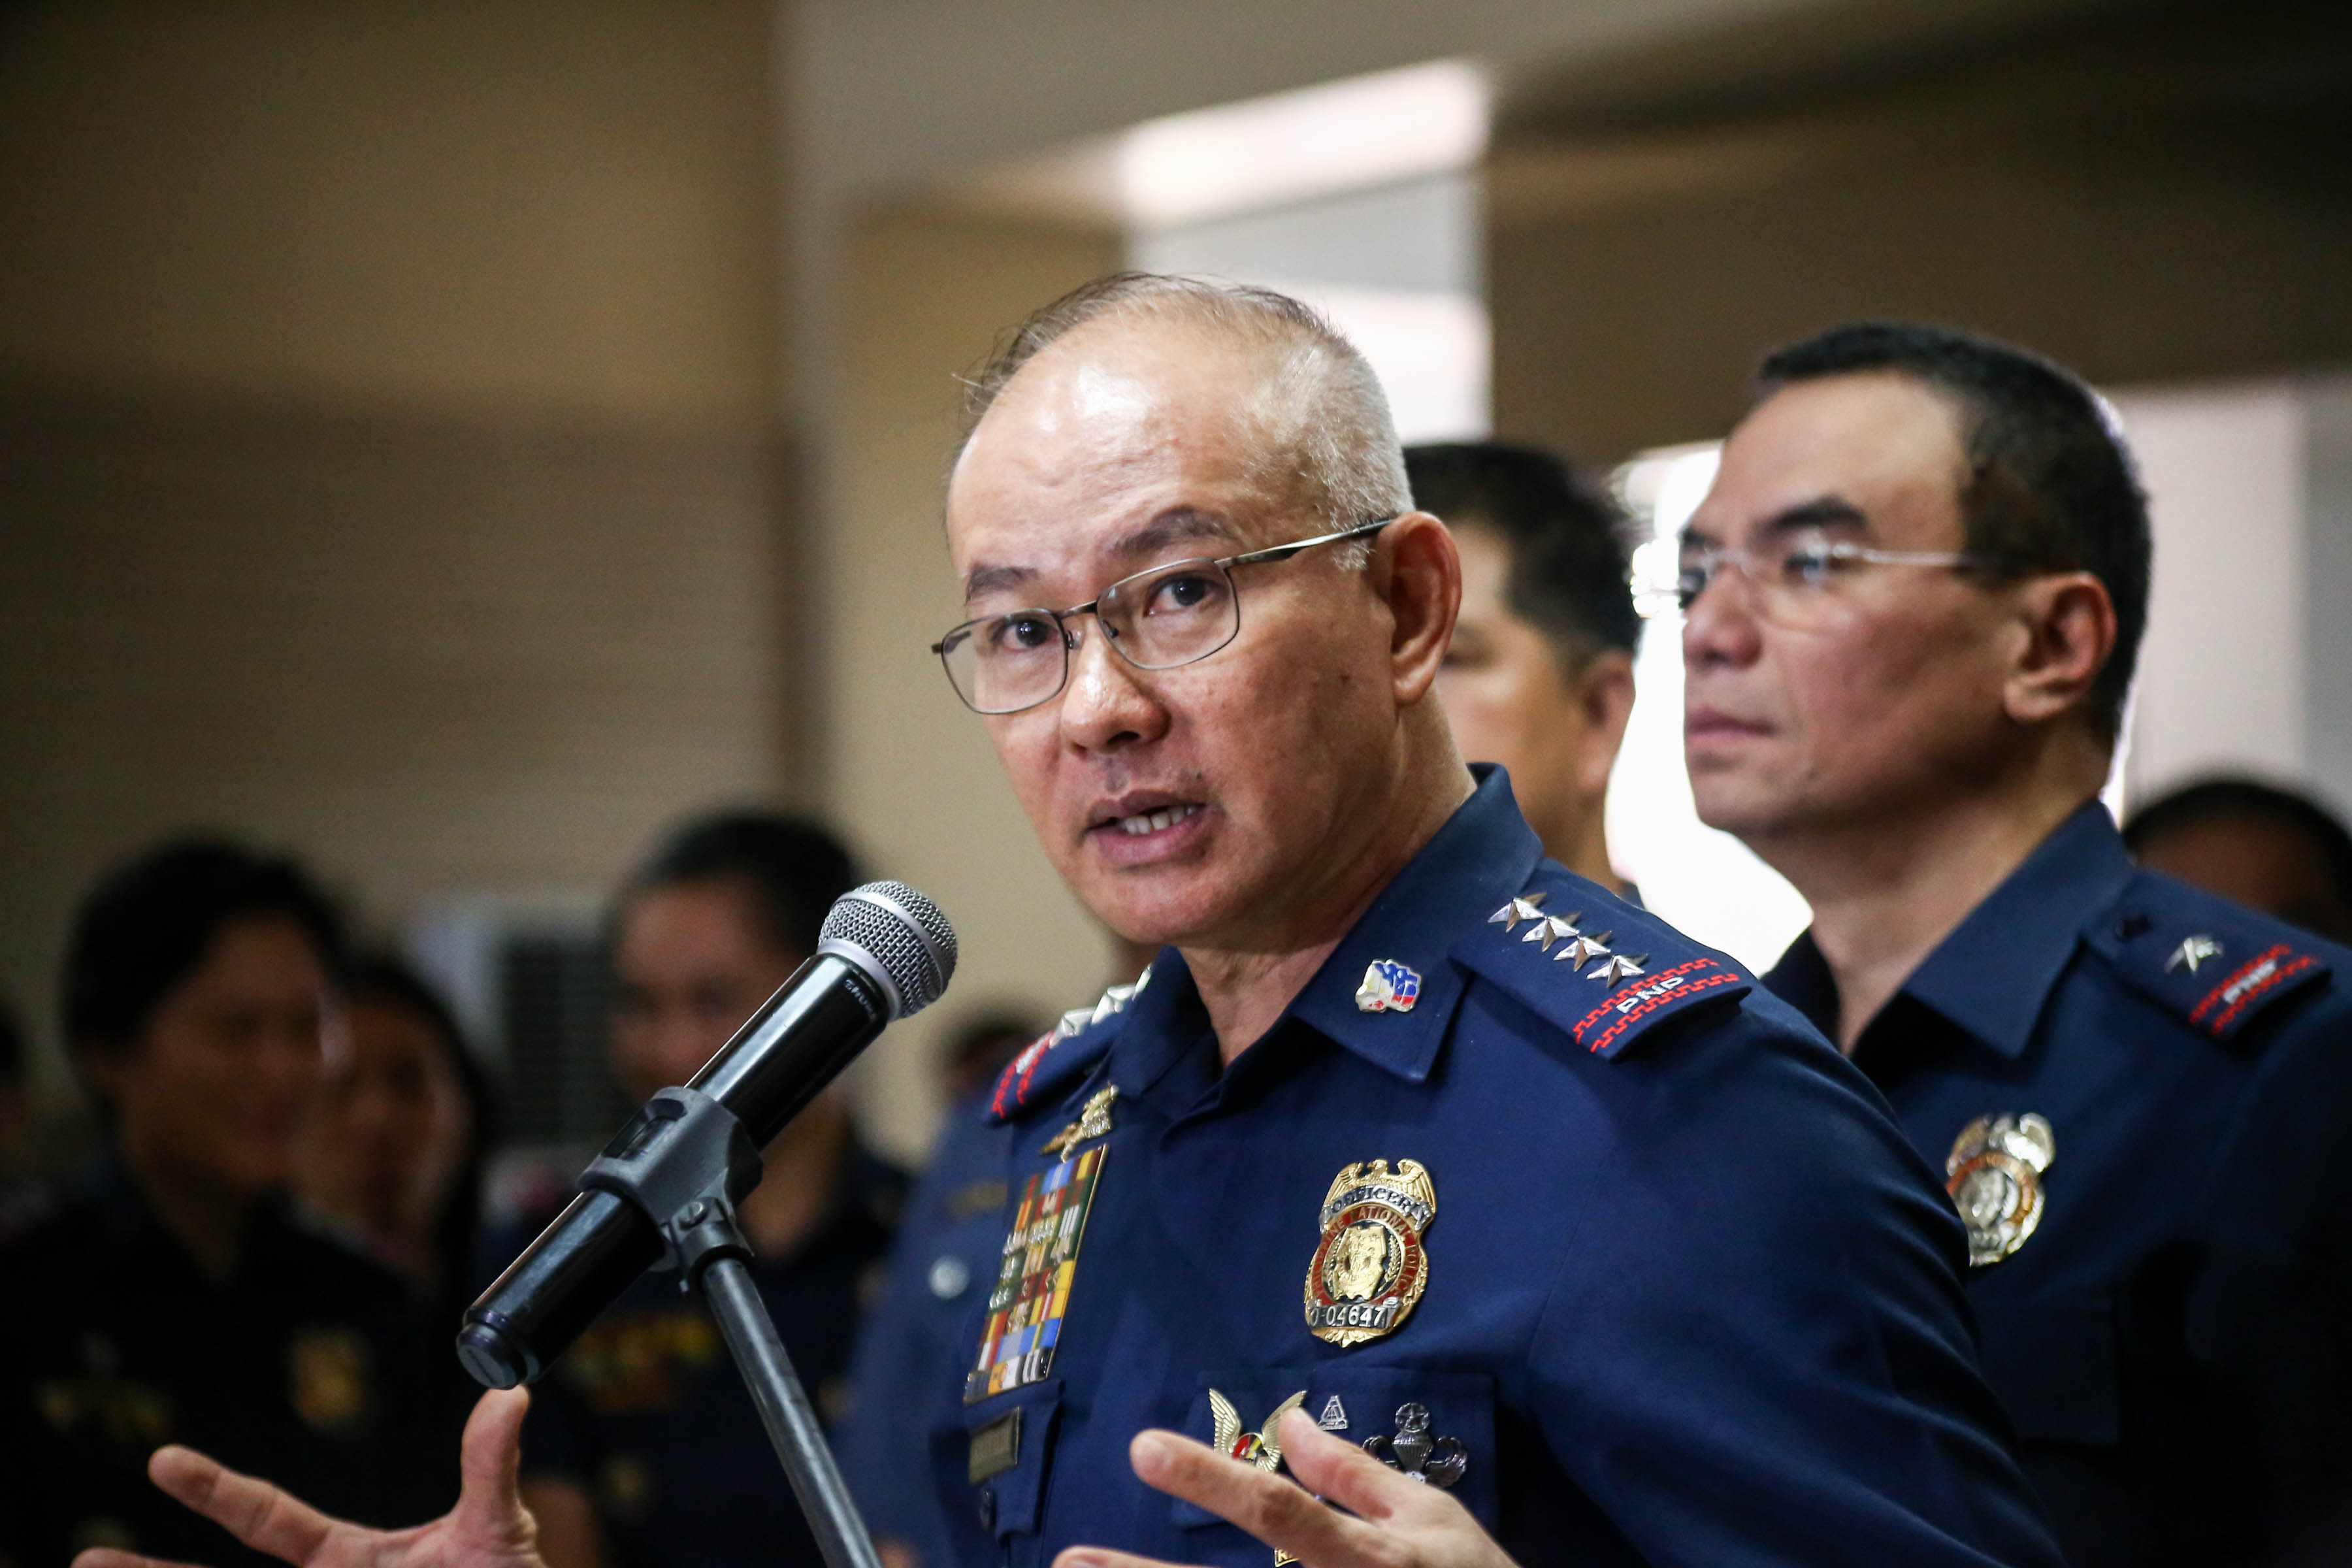 PNP on low peace index ranking: See for yourself how peaceful it is in PH